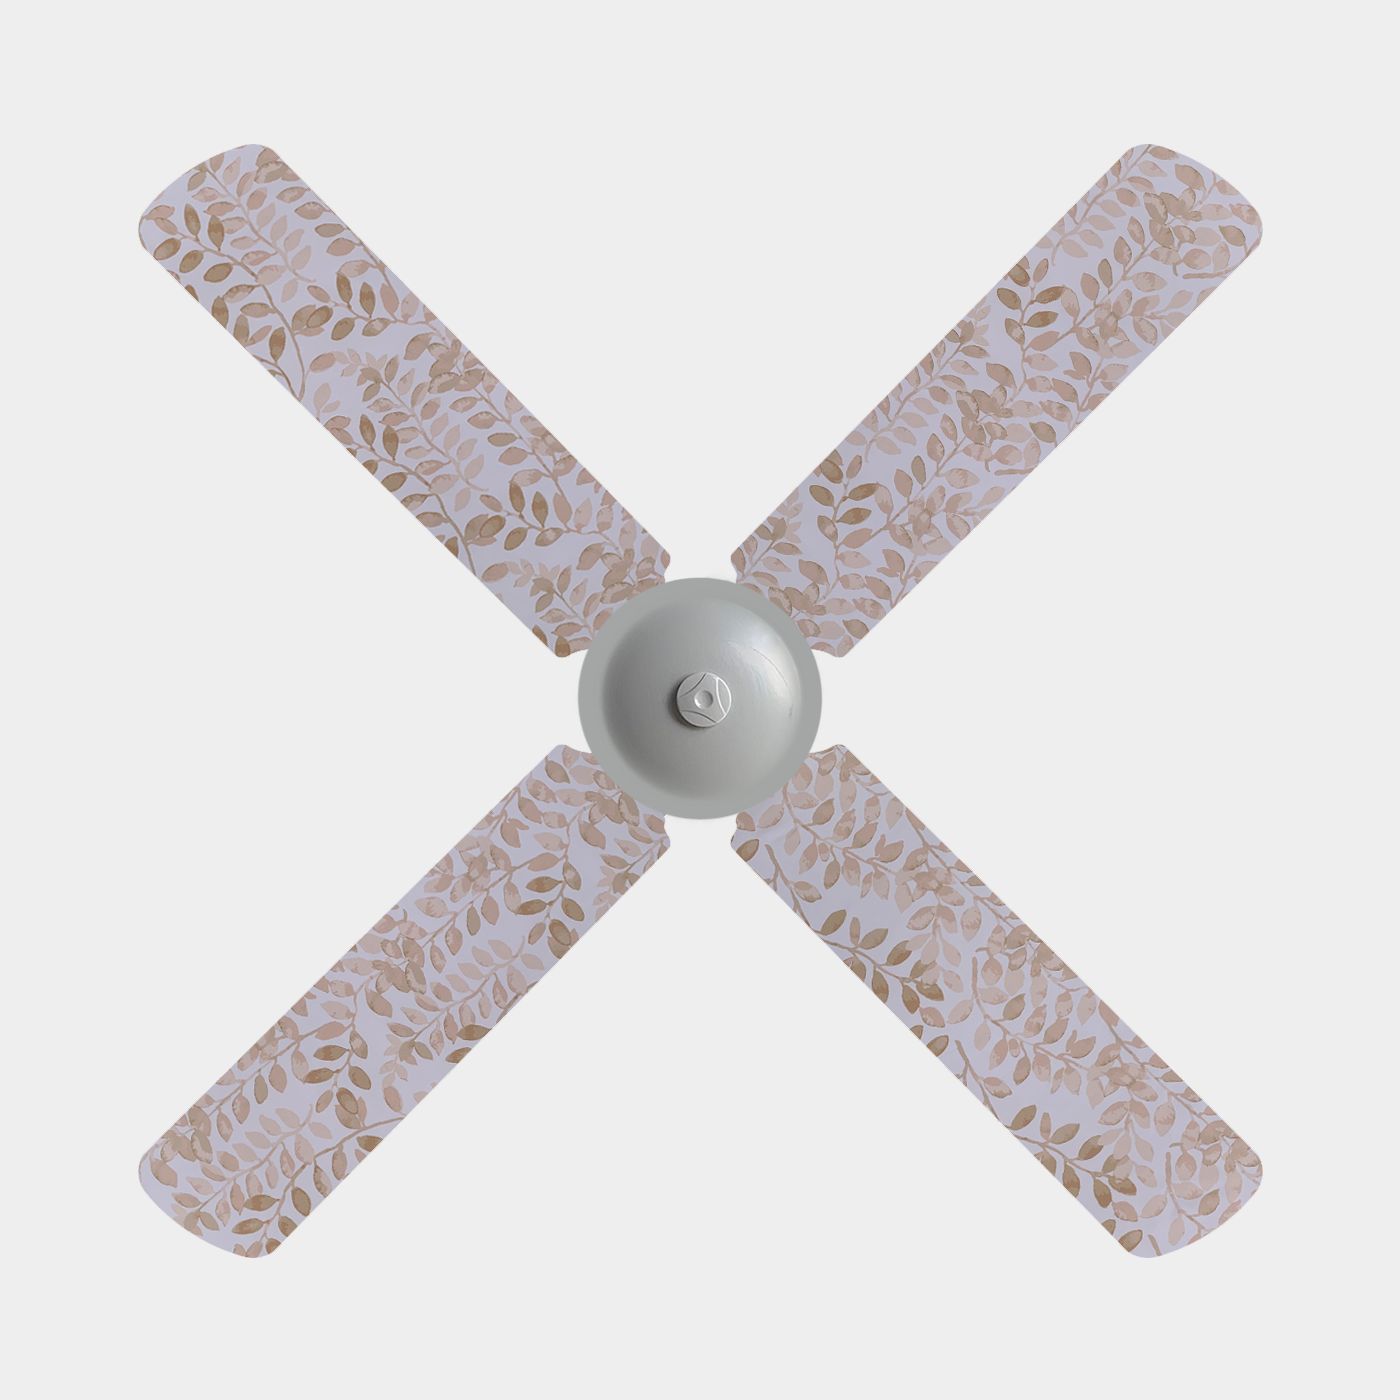 Three blade ceiling fan blade covers with rusty leaves on a beige background pattern